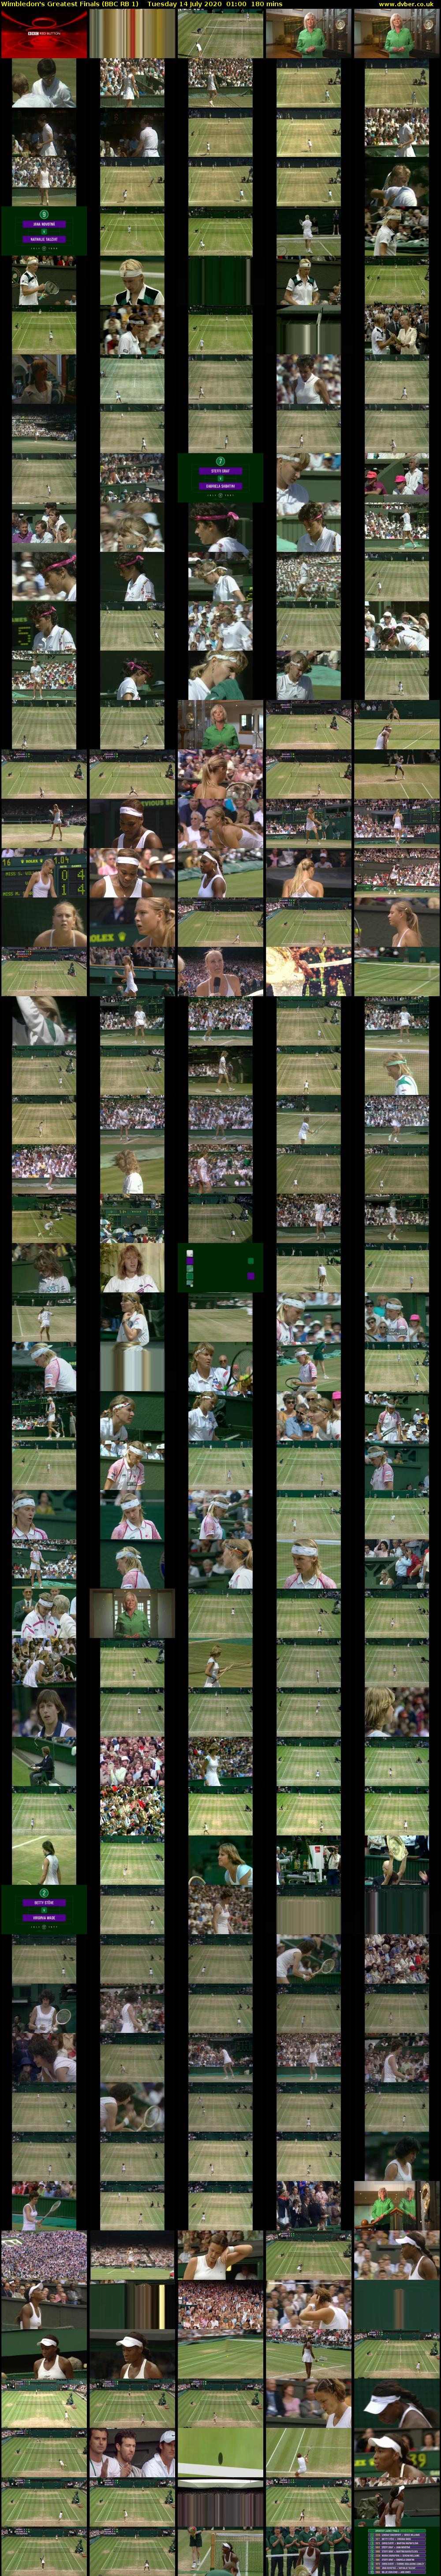 Wimbledon's Greatest Finals (BBC RB 1) Tuesday 14 July 2020 01:00 - 04:00